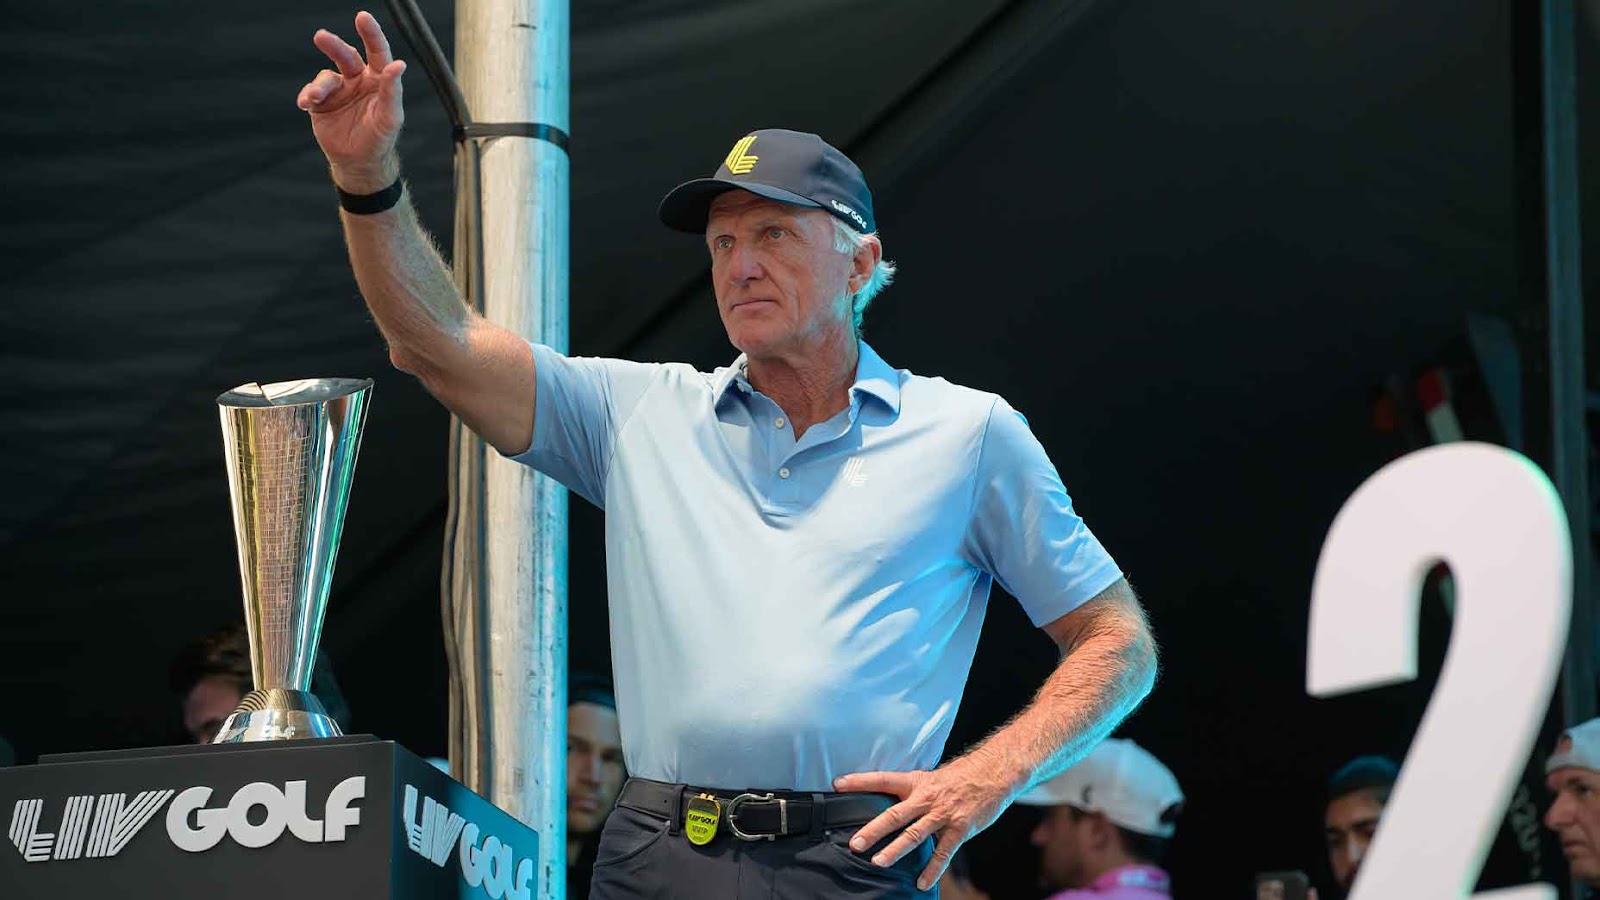 greg norman points in blue shirt from stage at LIV Golf team championships in Miami.